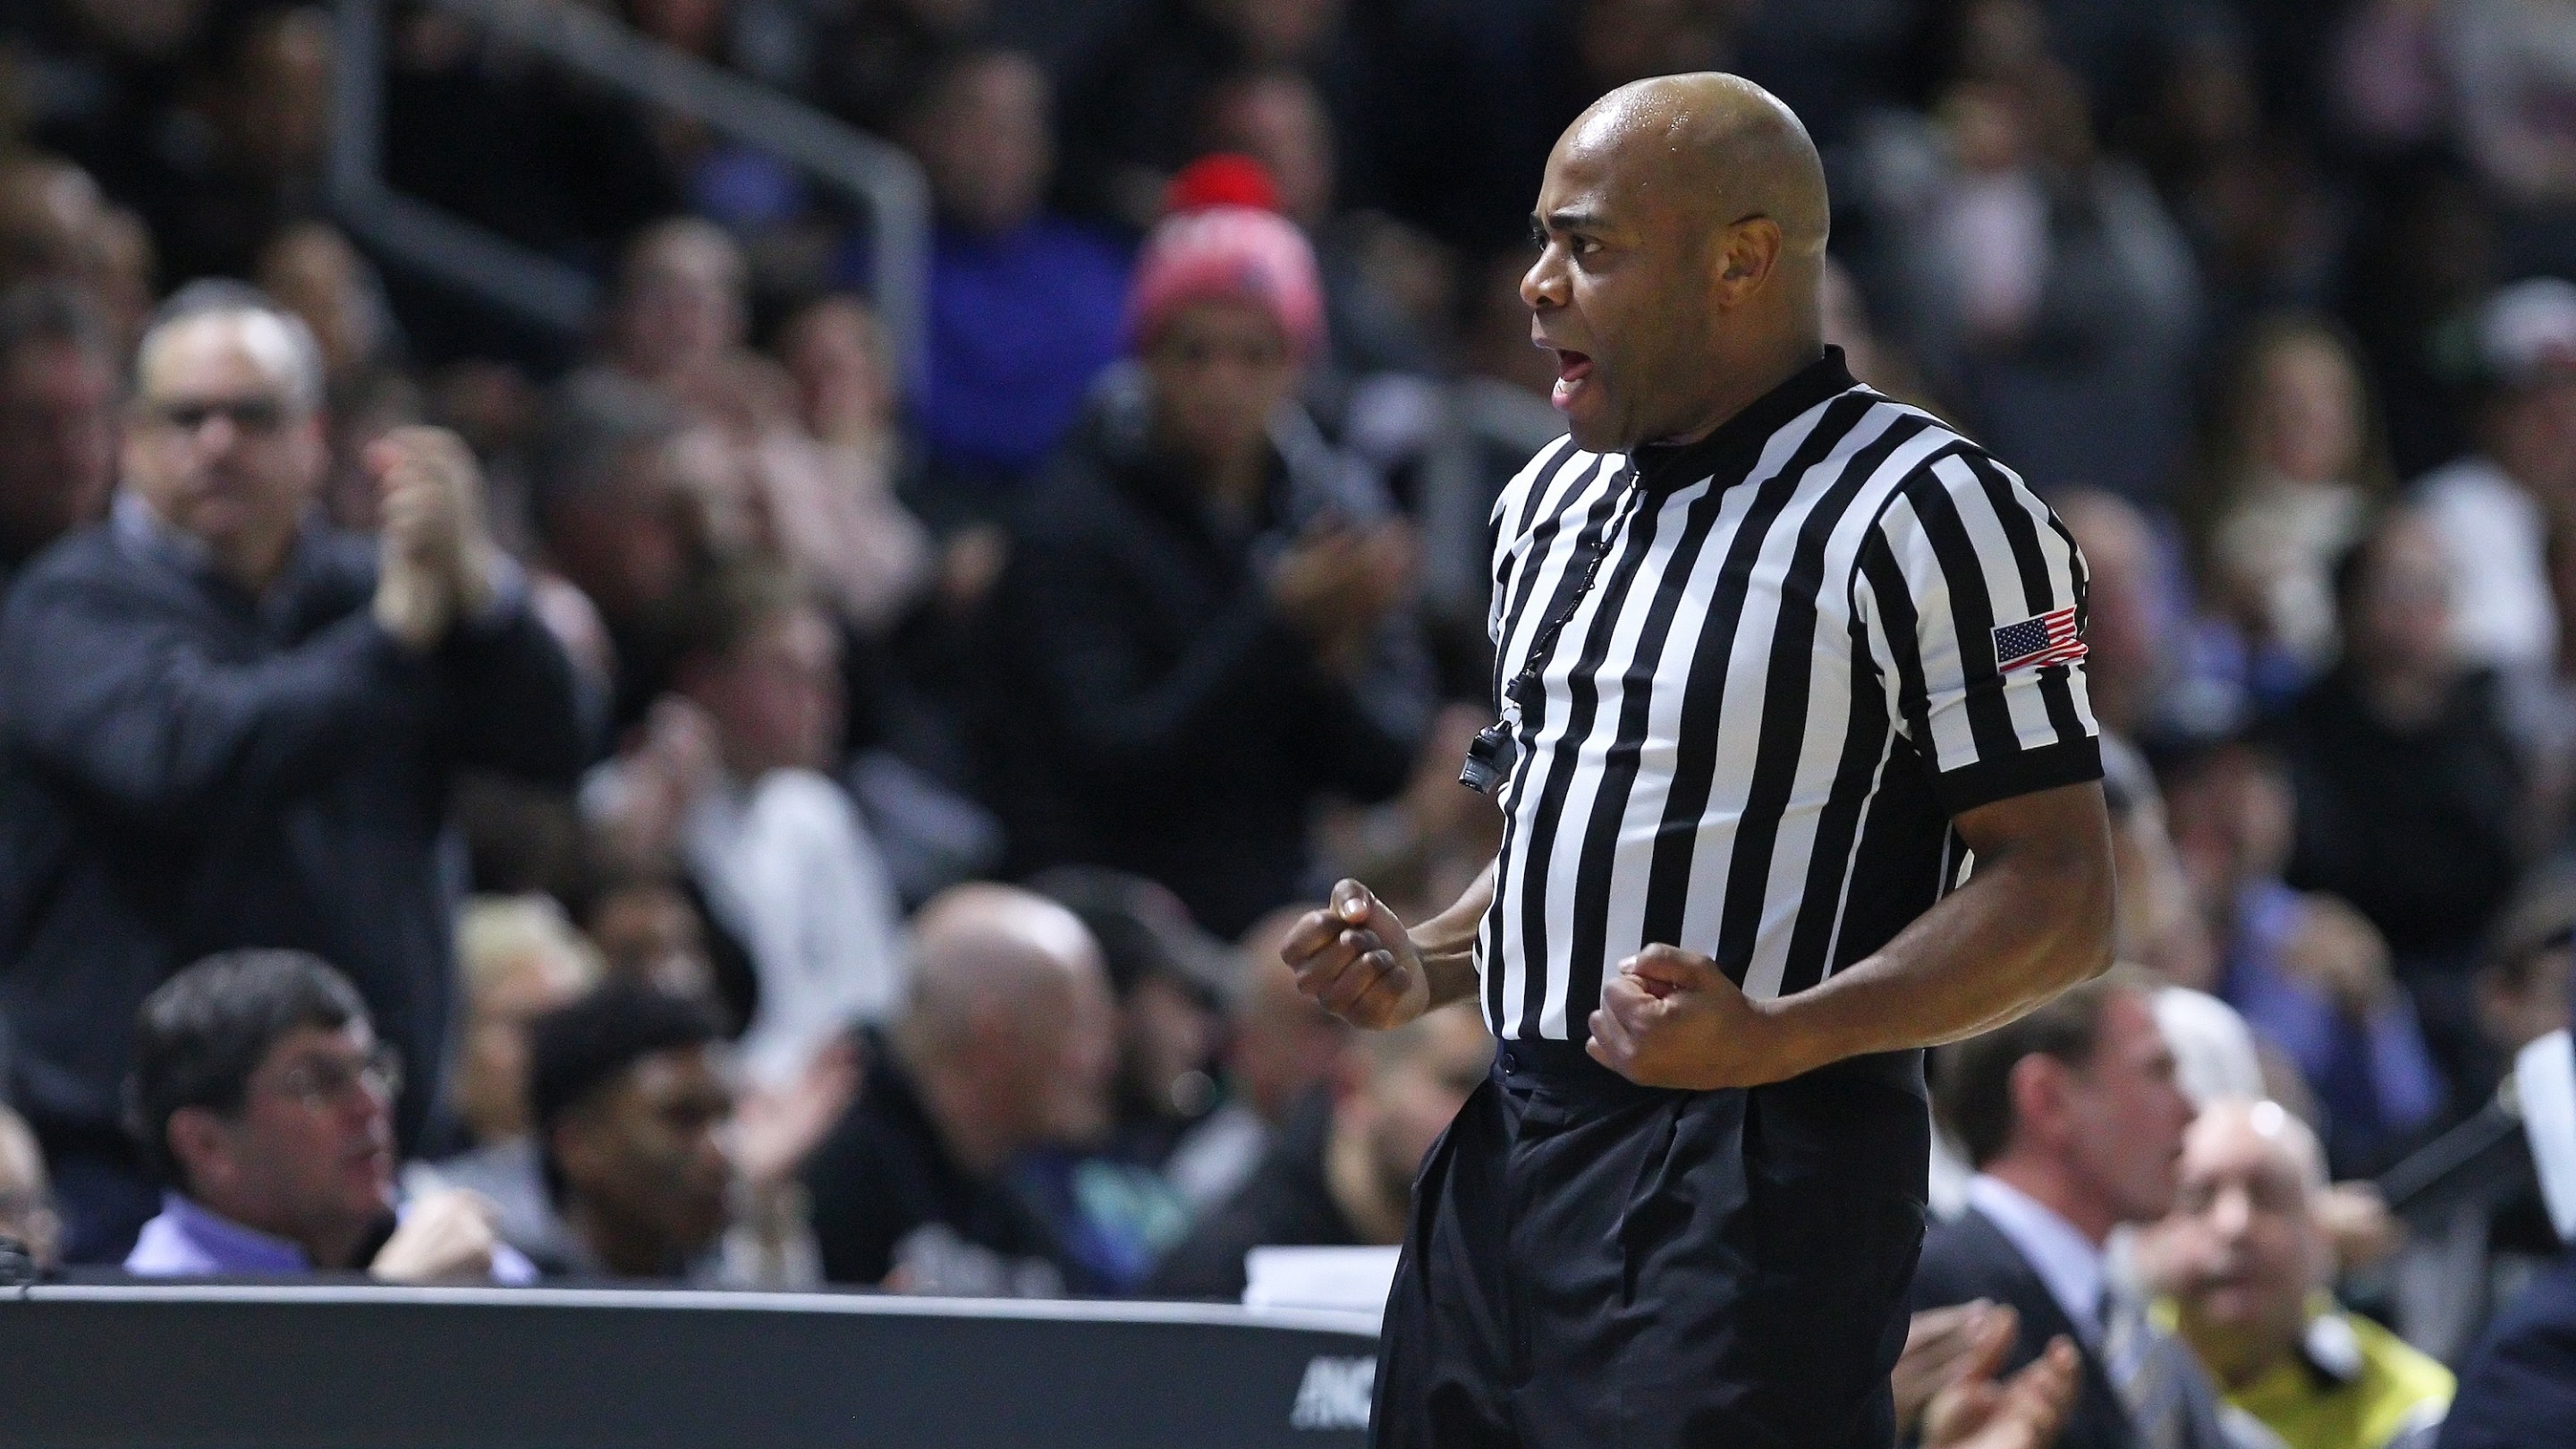 PROVIDENCE, RI - JANUARY 03: Referee Jeffrey Anderson calls a blocking foul during a college basketball game between Marquette Golden Eagles and Providence Friars on January 3, 2018, at the Dunkin Donuts Center in Providence, RI. Marquette won in overtime 95-90 . (Photo by M. Anthony Nesmith/Icon Sportswire via Getty Images)